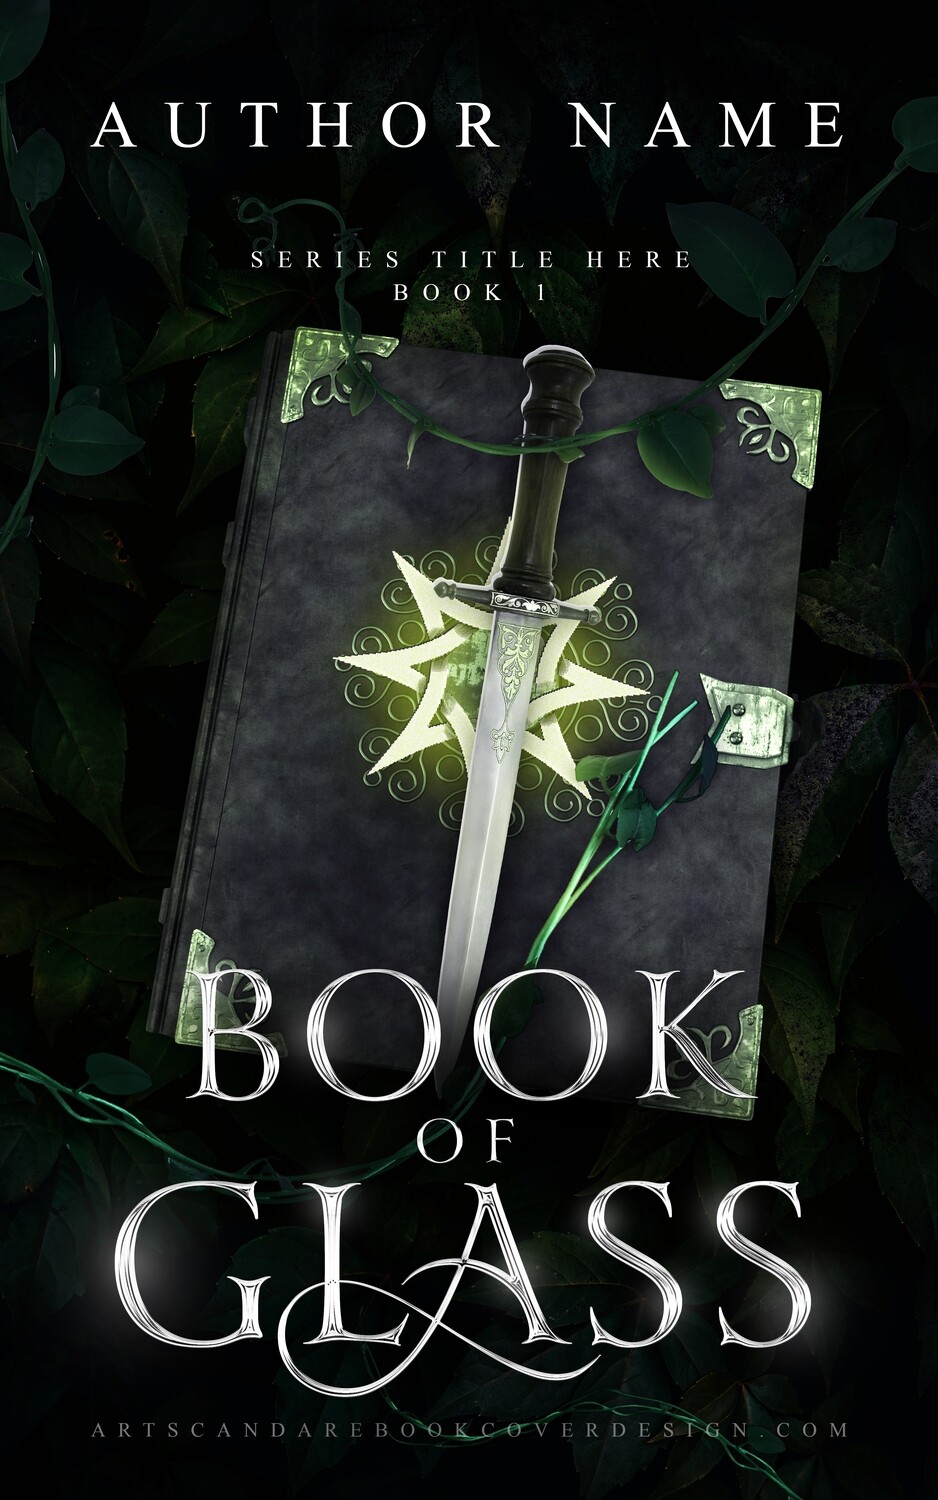 BOOK OF GLASS